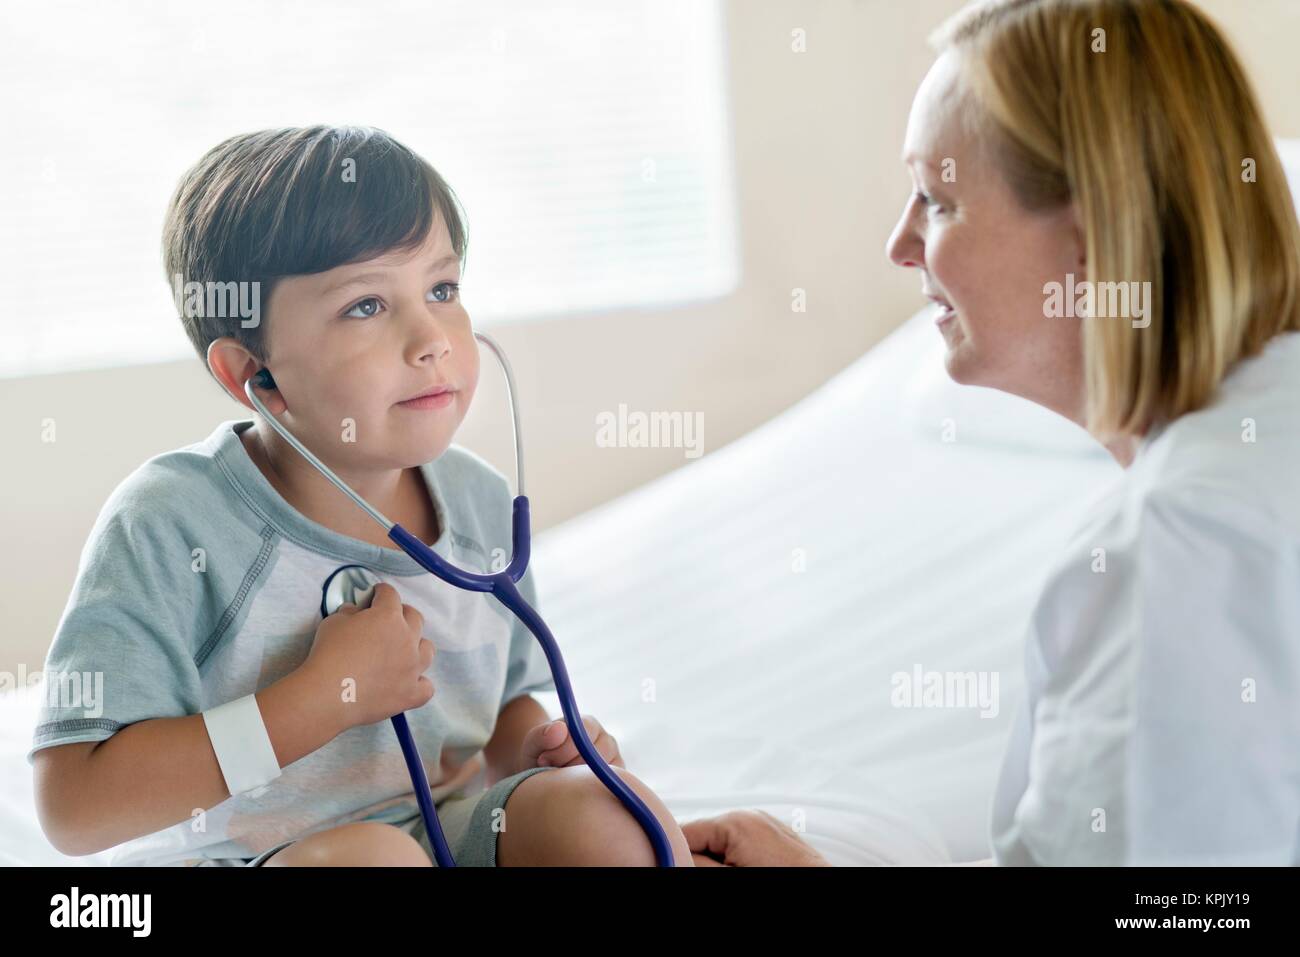 Young boy wearing stethoscope with nurse. Stock Photo